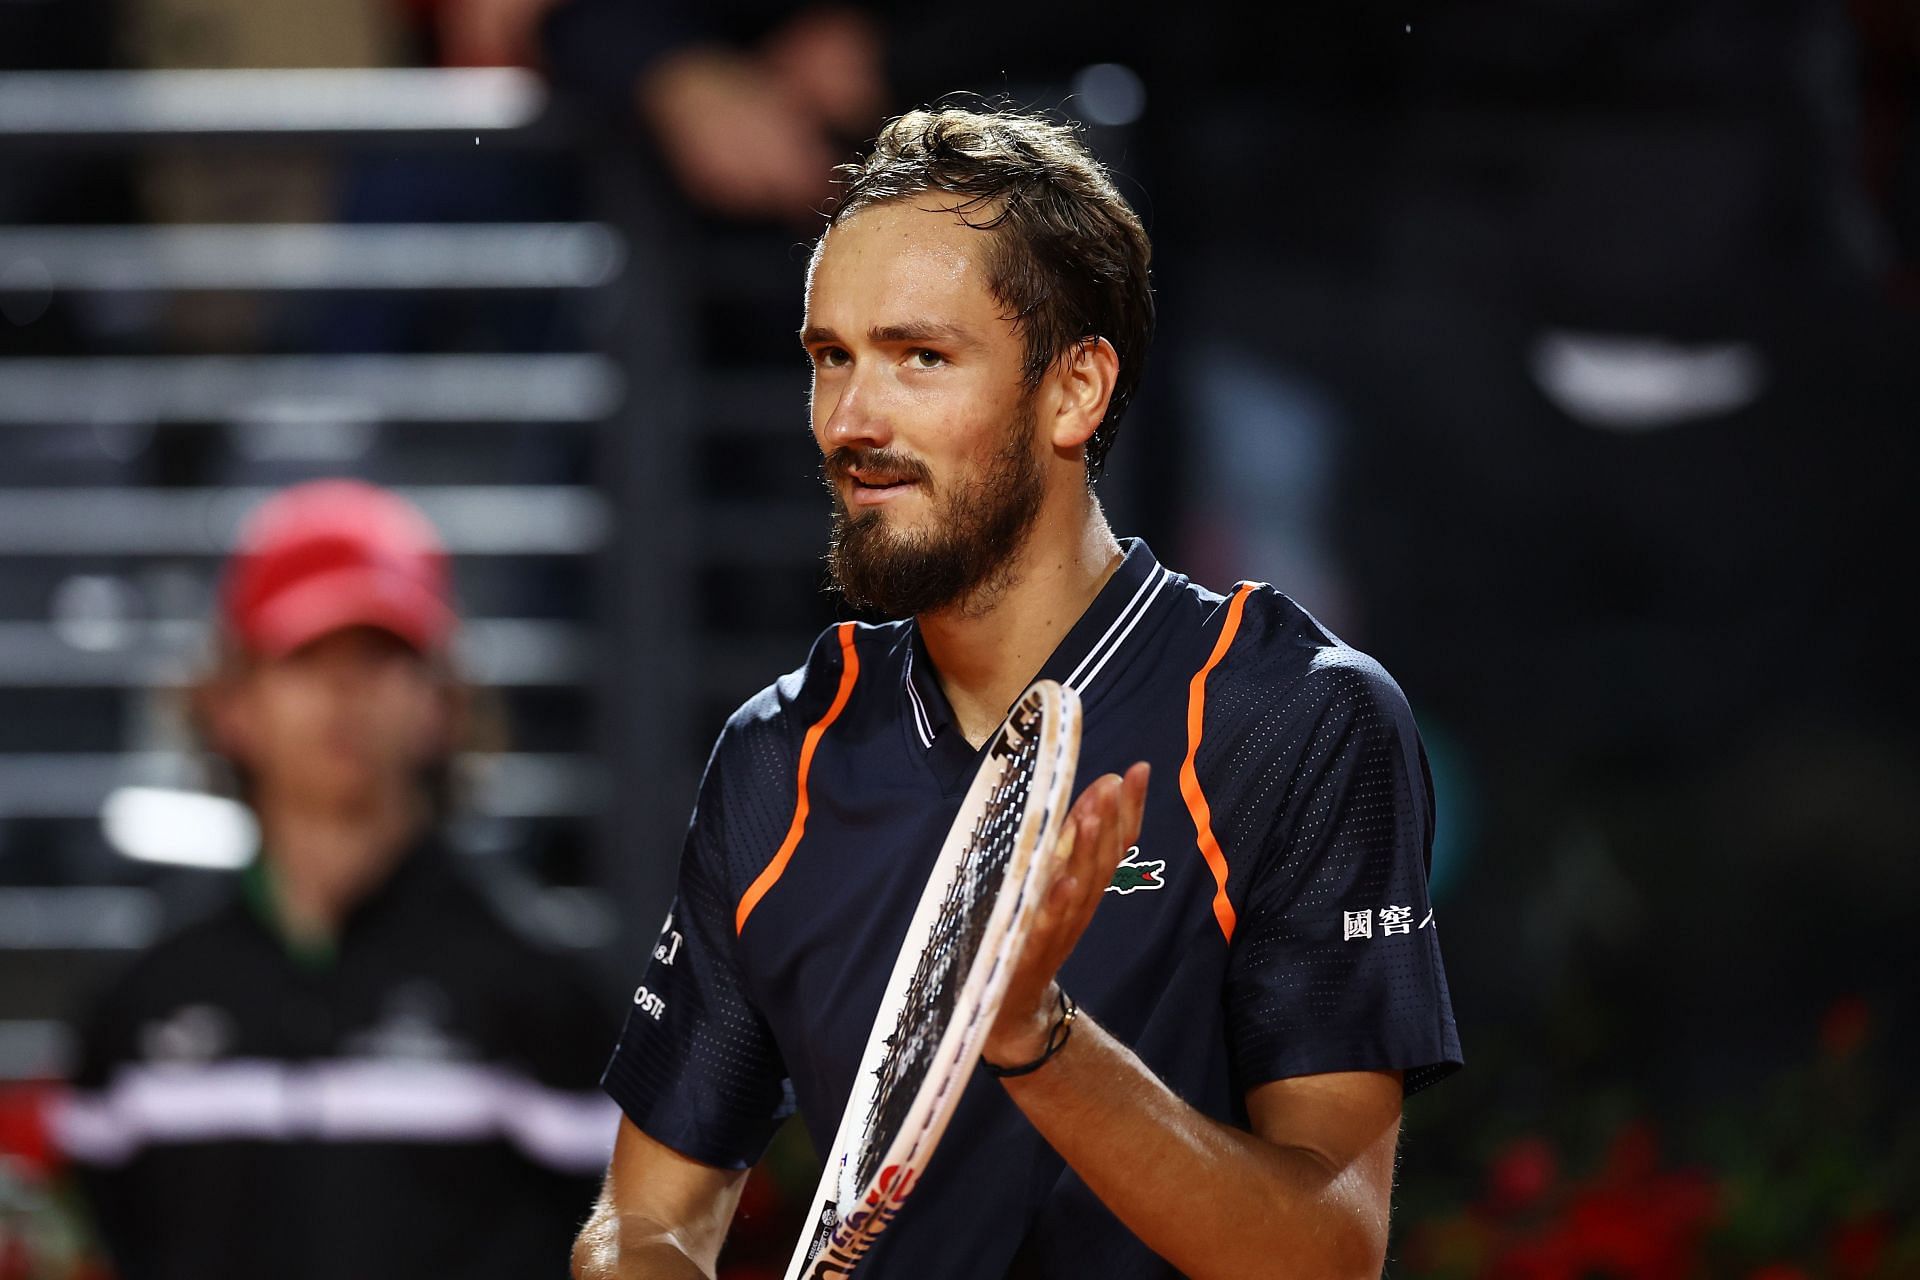 Italian Open 2023 Mens Final, Daniil Medvedev vs Holger Rune Where to watch, TV schedule, live streaming details, and more